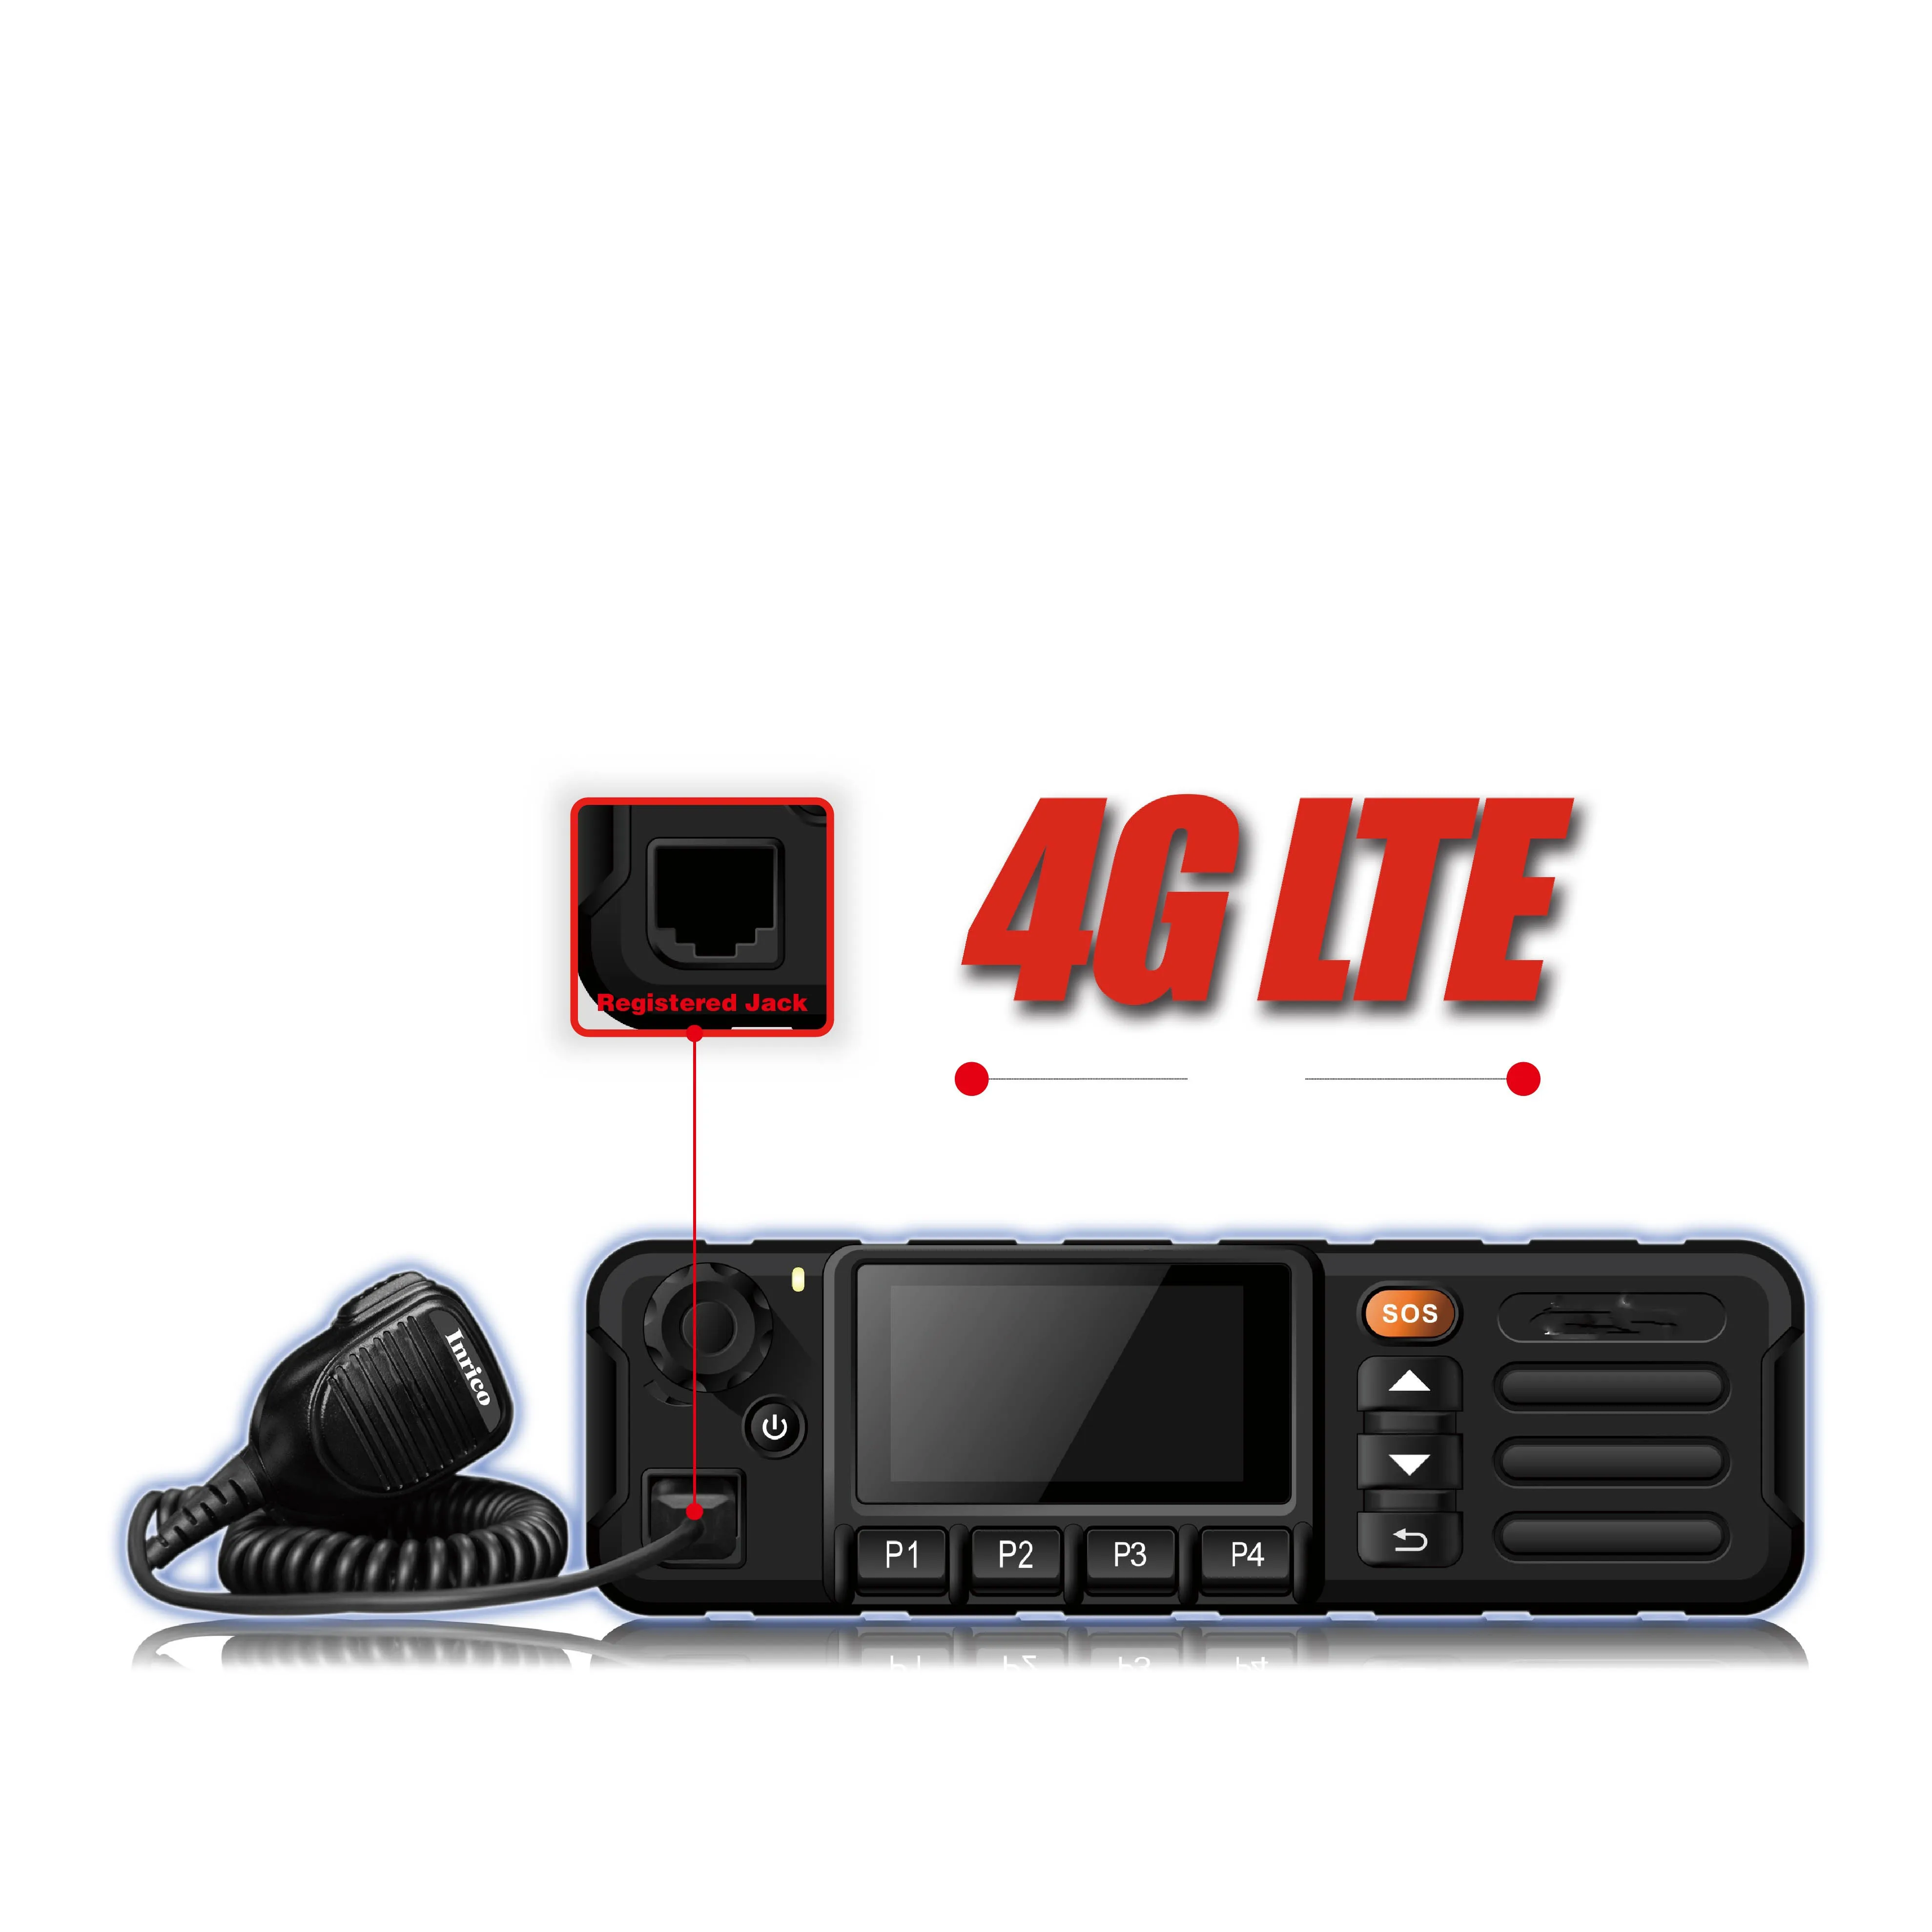 Hot Selling Network Sim Card 4G LTE Vehicle Mounted Mobile Walkie Talkie Car Radio Android POC Two Way Radio